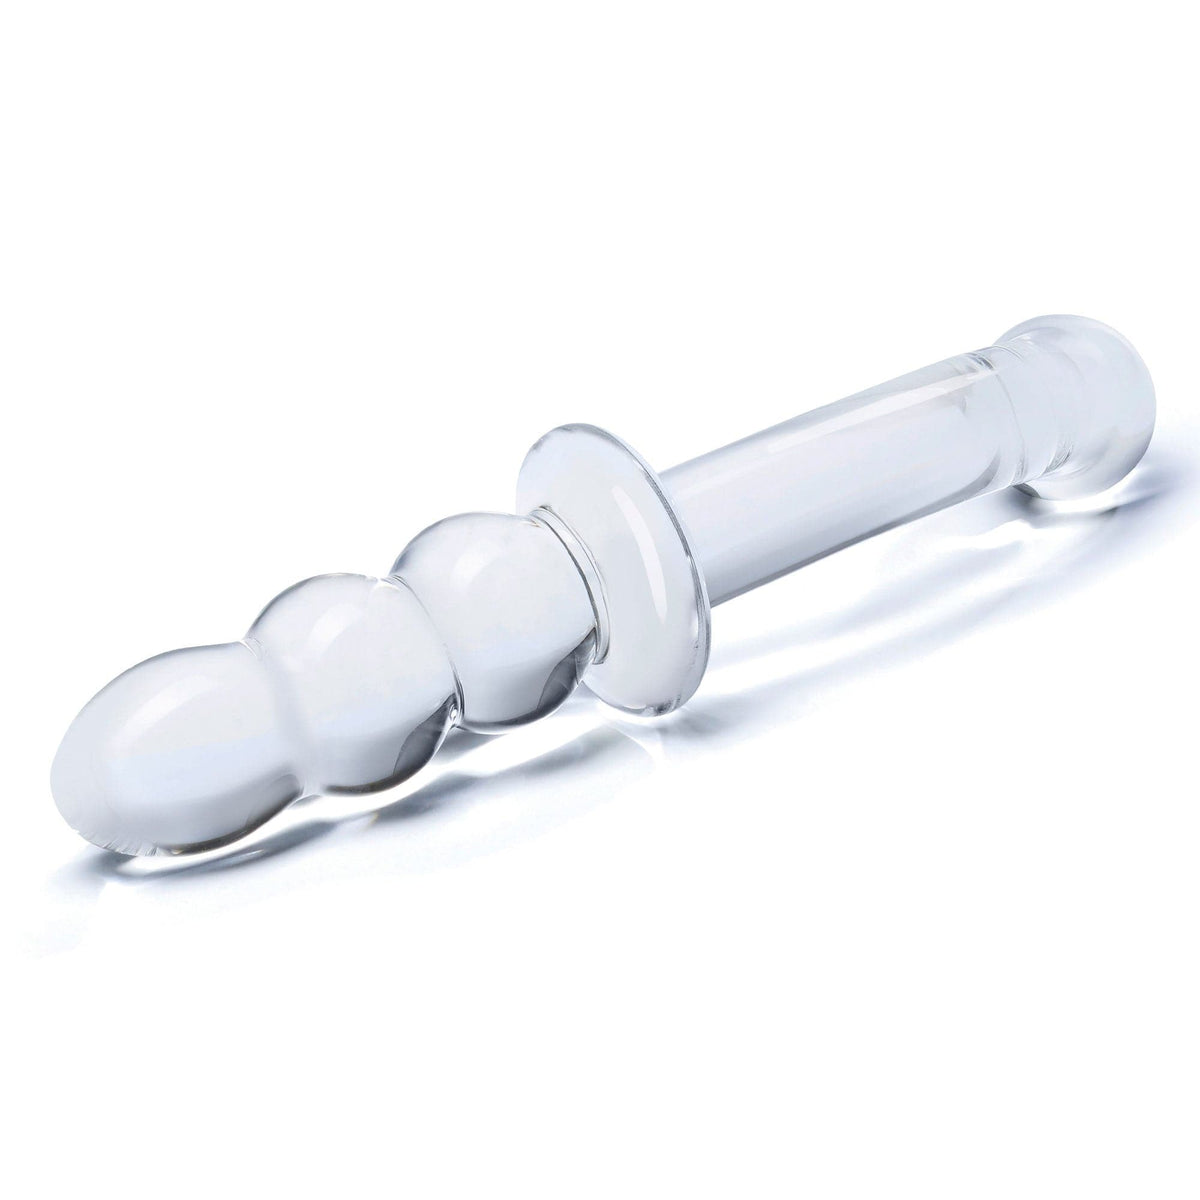 8 inch ribbed g spot glass dildo clear